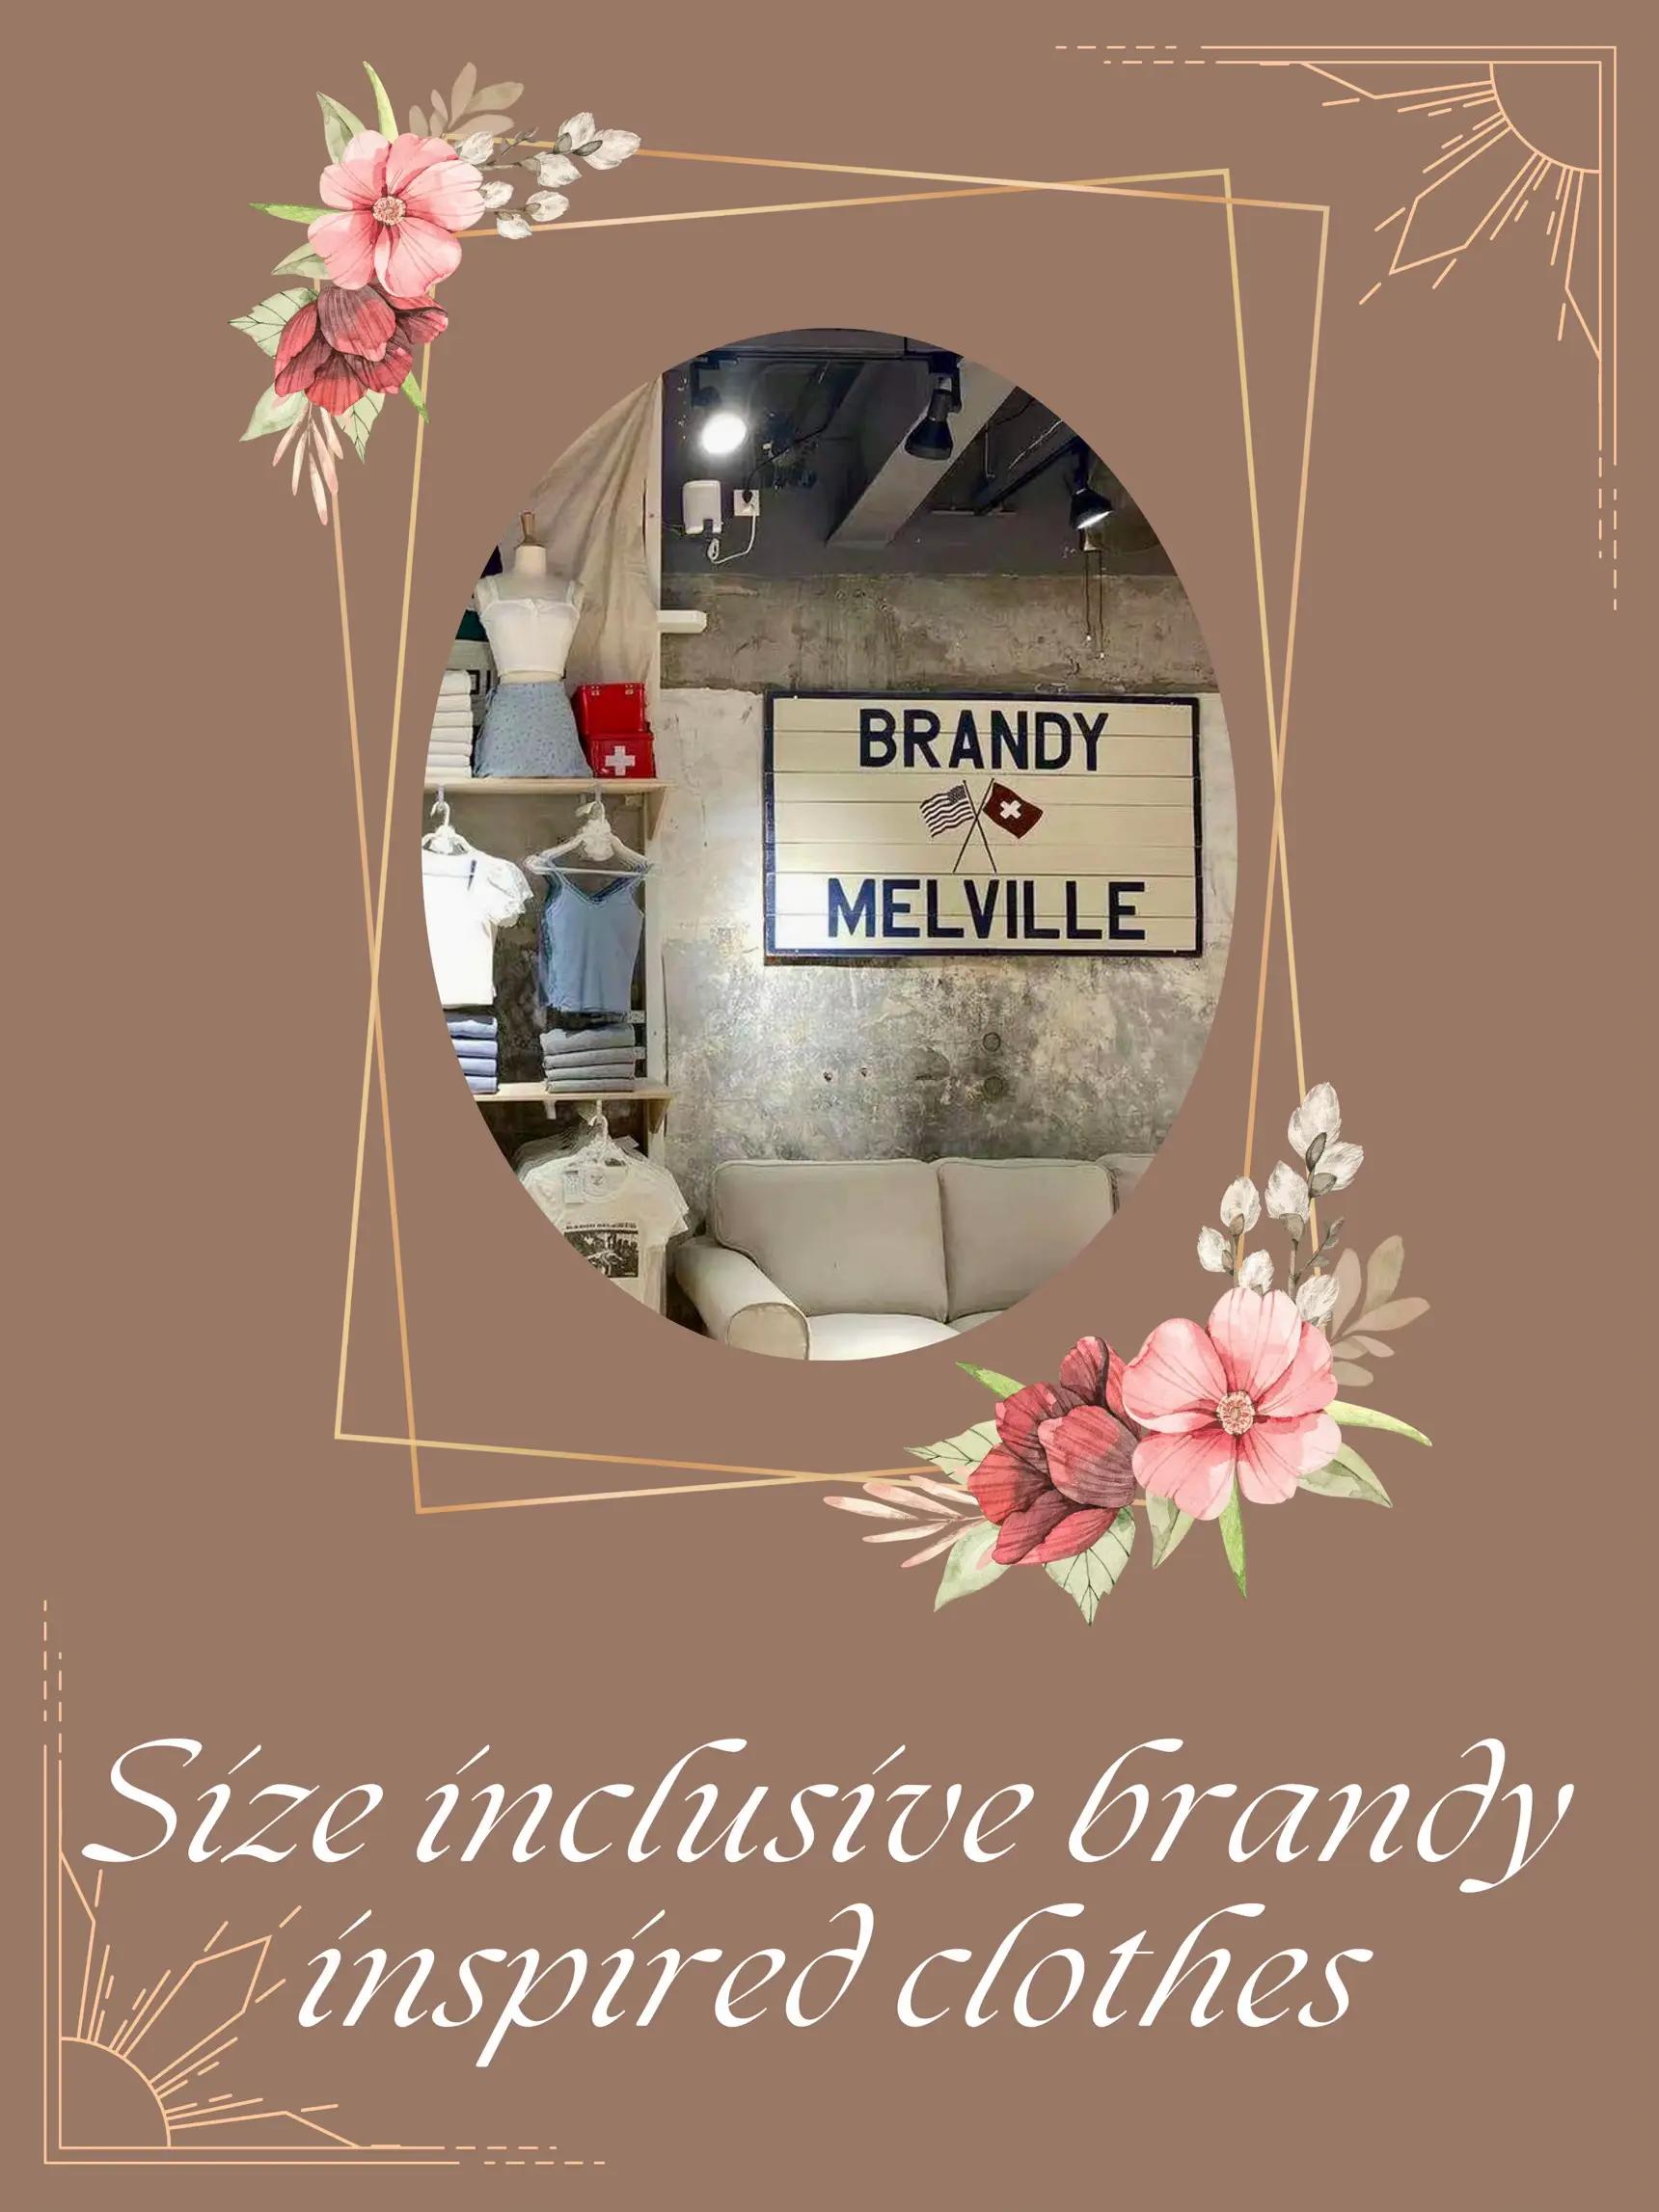 A few days ago I ordered from Brandy Melville Europe and received my order  the other day. There was an additional top in my order with the note that  it was a